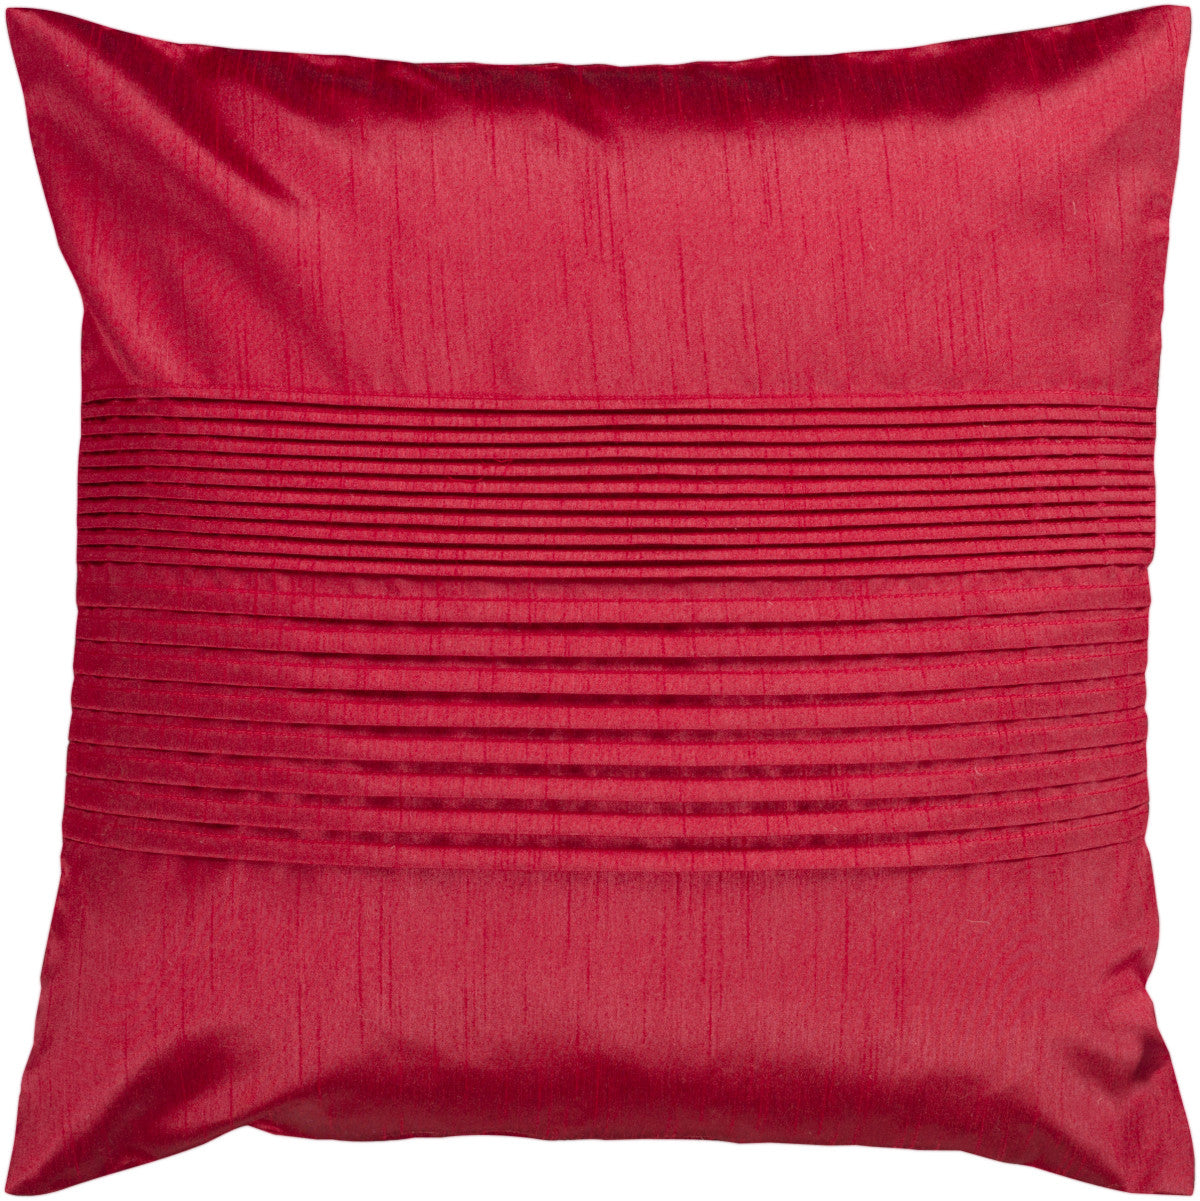 Surya Solid Pleated Lori Lee HH-025 Pillow